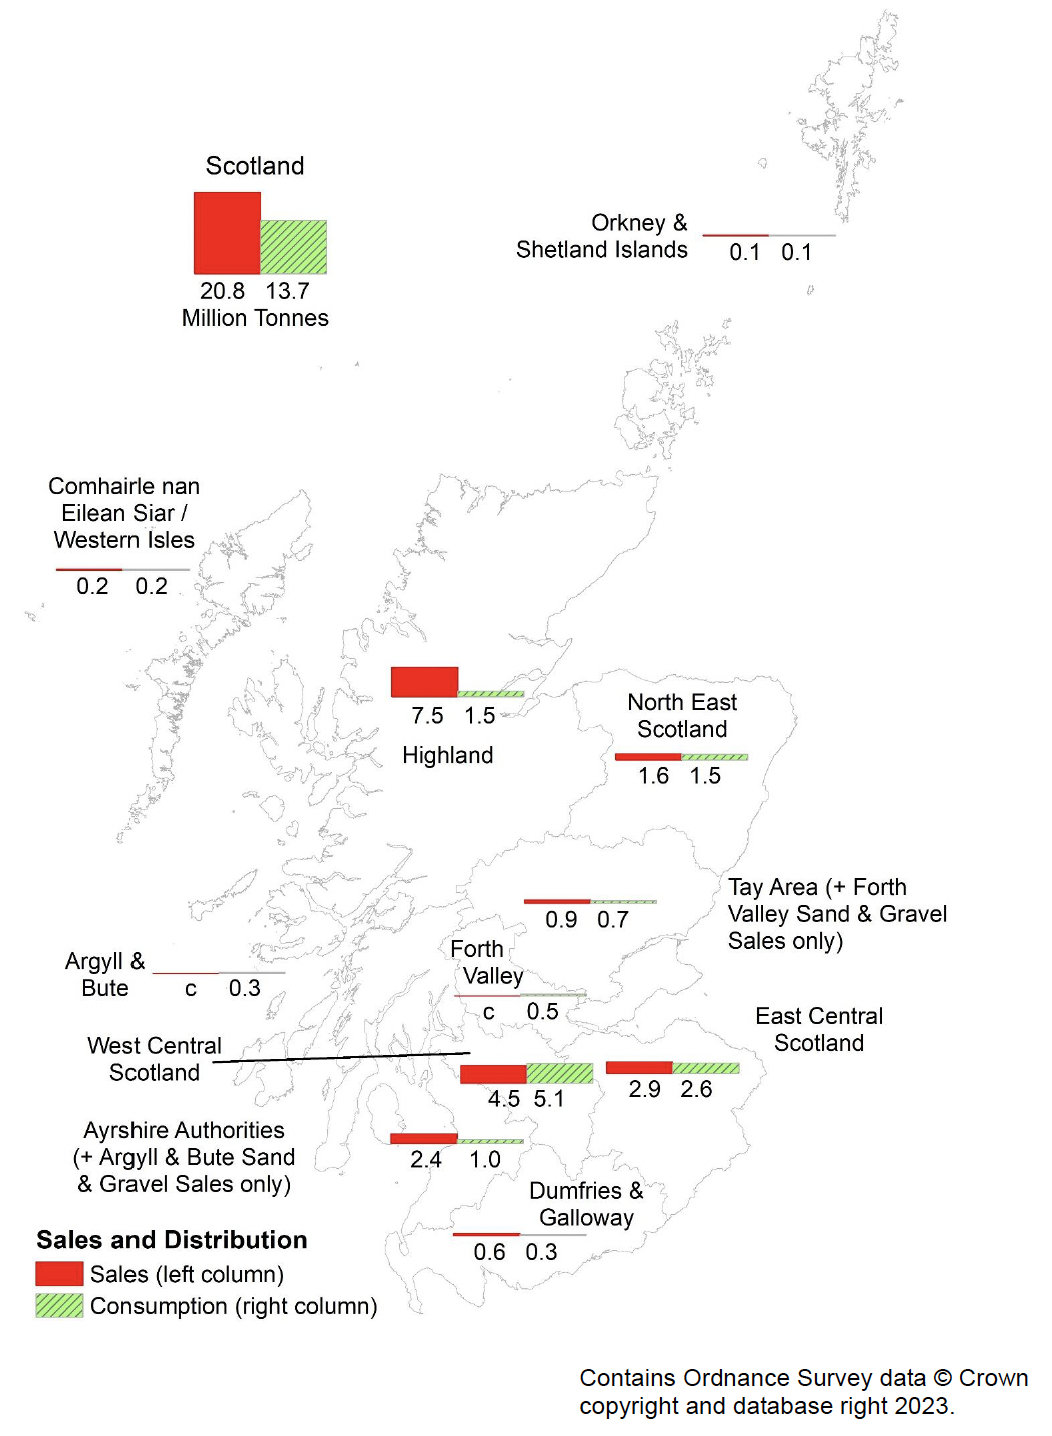 Map showing sales and consumption of  primary aggregate 

Scotland 
Sales 20.8 mt 
Consumption 13.7 mt 

Orkney and Shetland 
Sales 0.1 Mt 
Consumption 0.1 Mt 

Comhairle nan Eilean Siar/ Western Isles 
Sales 0.2 Mt 
Consumption 0.2 Mt 

Highland 
Sales 7.5 Mt 
Consumption 1.5 Mt 

North East Scotland 
Sales 1.6 Mt 
Consumption 1.5 Mt 

Tay Area (and Forth Valley sales only) 
Sales 0.9 Mt 
Consumption 0.7 Mt 

Forth Valley 
Sales - Confidential 
Consumption 0.5 Mt 

East Central Scotland 
Sales 2.9 Mt 
Consumption 2.6 Mt 

West Central Scotland 
Sales 4.5 Mt 
Consumption 5.1 Mt 

Ayrshire Authorities (and Argyll and Bute sales only) 
Sales 2.4 Mt 
Consumption 1.0 Mt 

Dumfries and Galloway 
Sales 0.6 Mt 
Consumption 0.3 Mt 

Argyll and Bute 
Sales confidential 
Consumption 0.5 Mt.